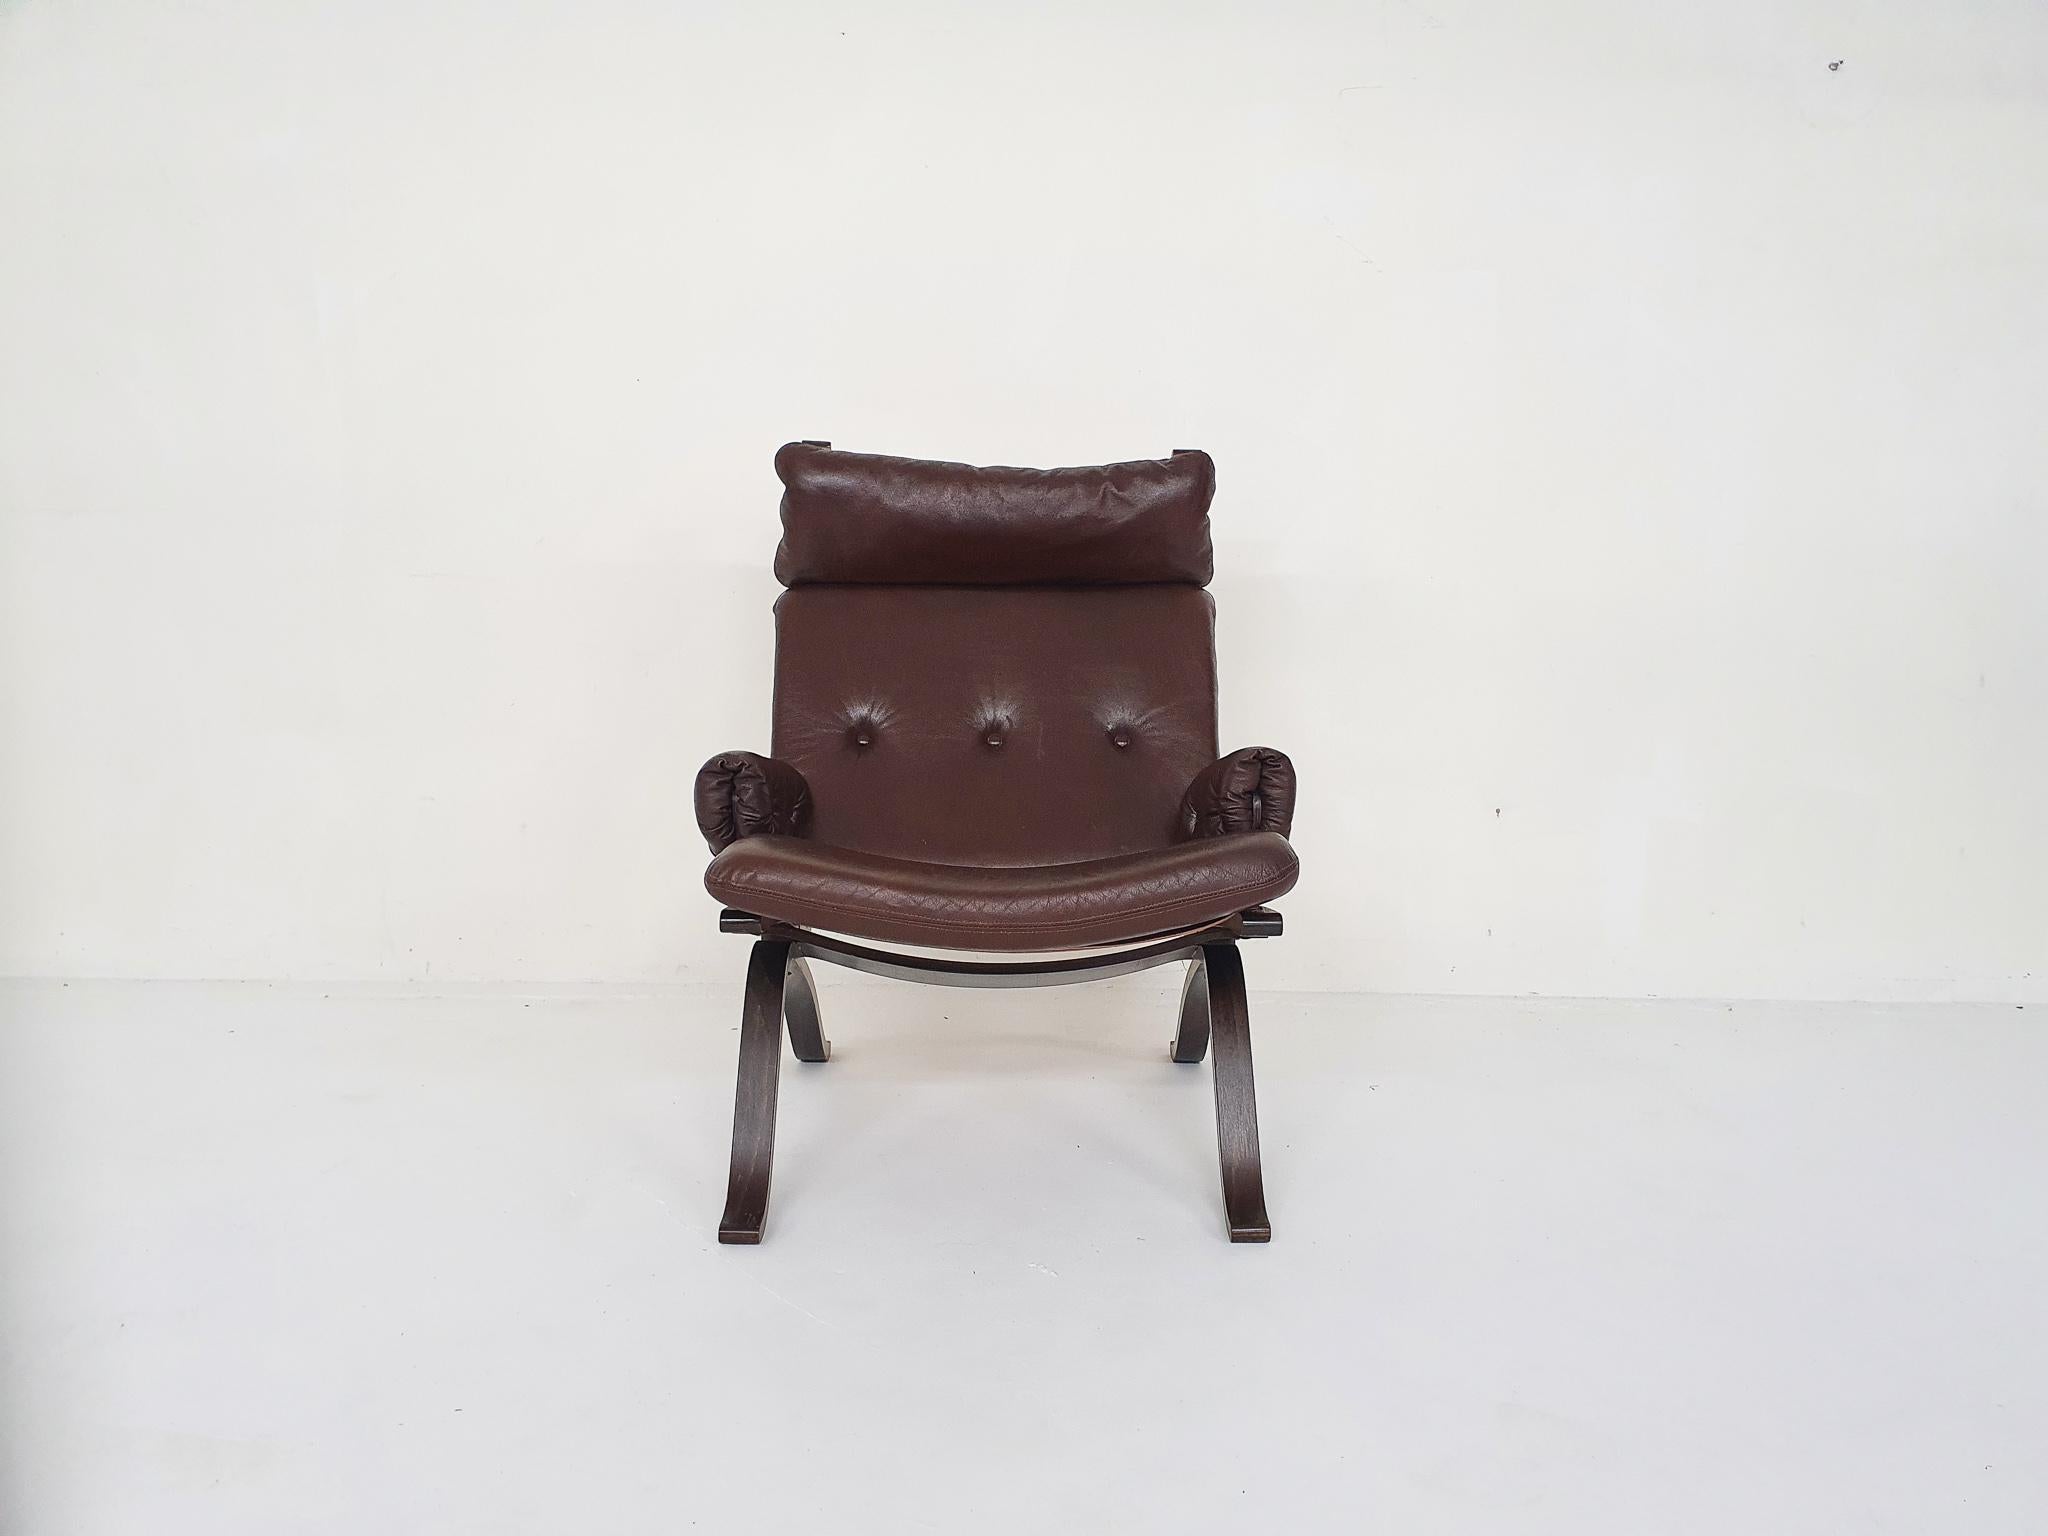 Brown lounge chair with brown faux-leather cushions and canvas back.
Attributed to Ingmar Relling for Westnofa and in the style of Sigurd Ressel for Vatne Mobler.
In good condition, only some dis-coloration to the canvas on the back.